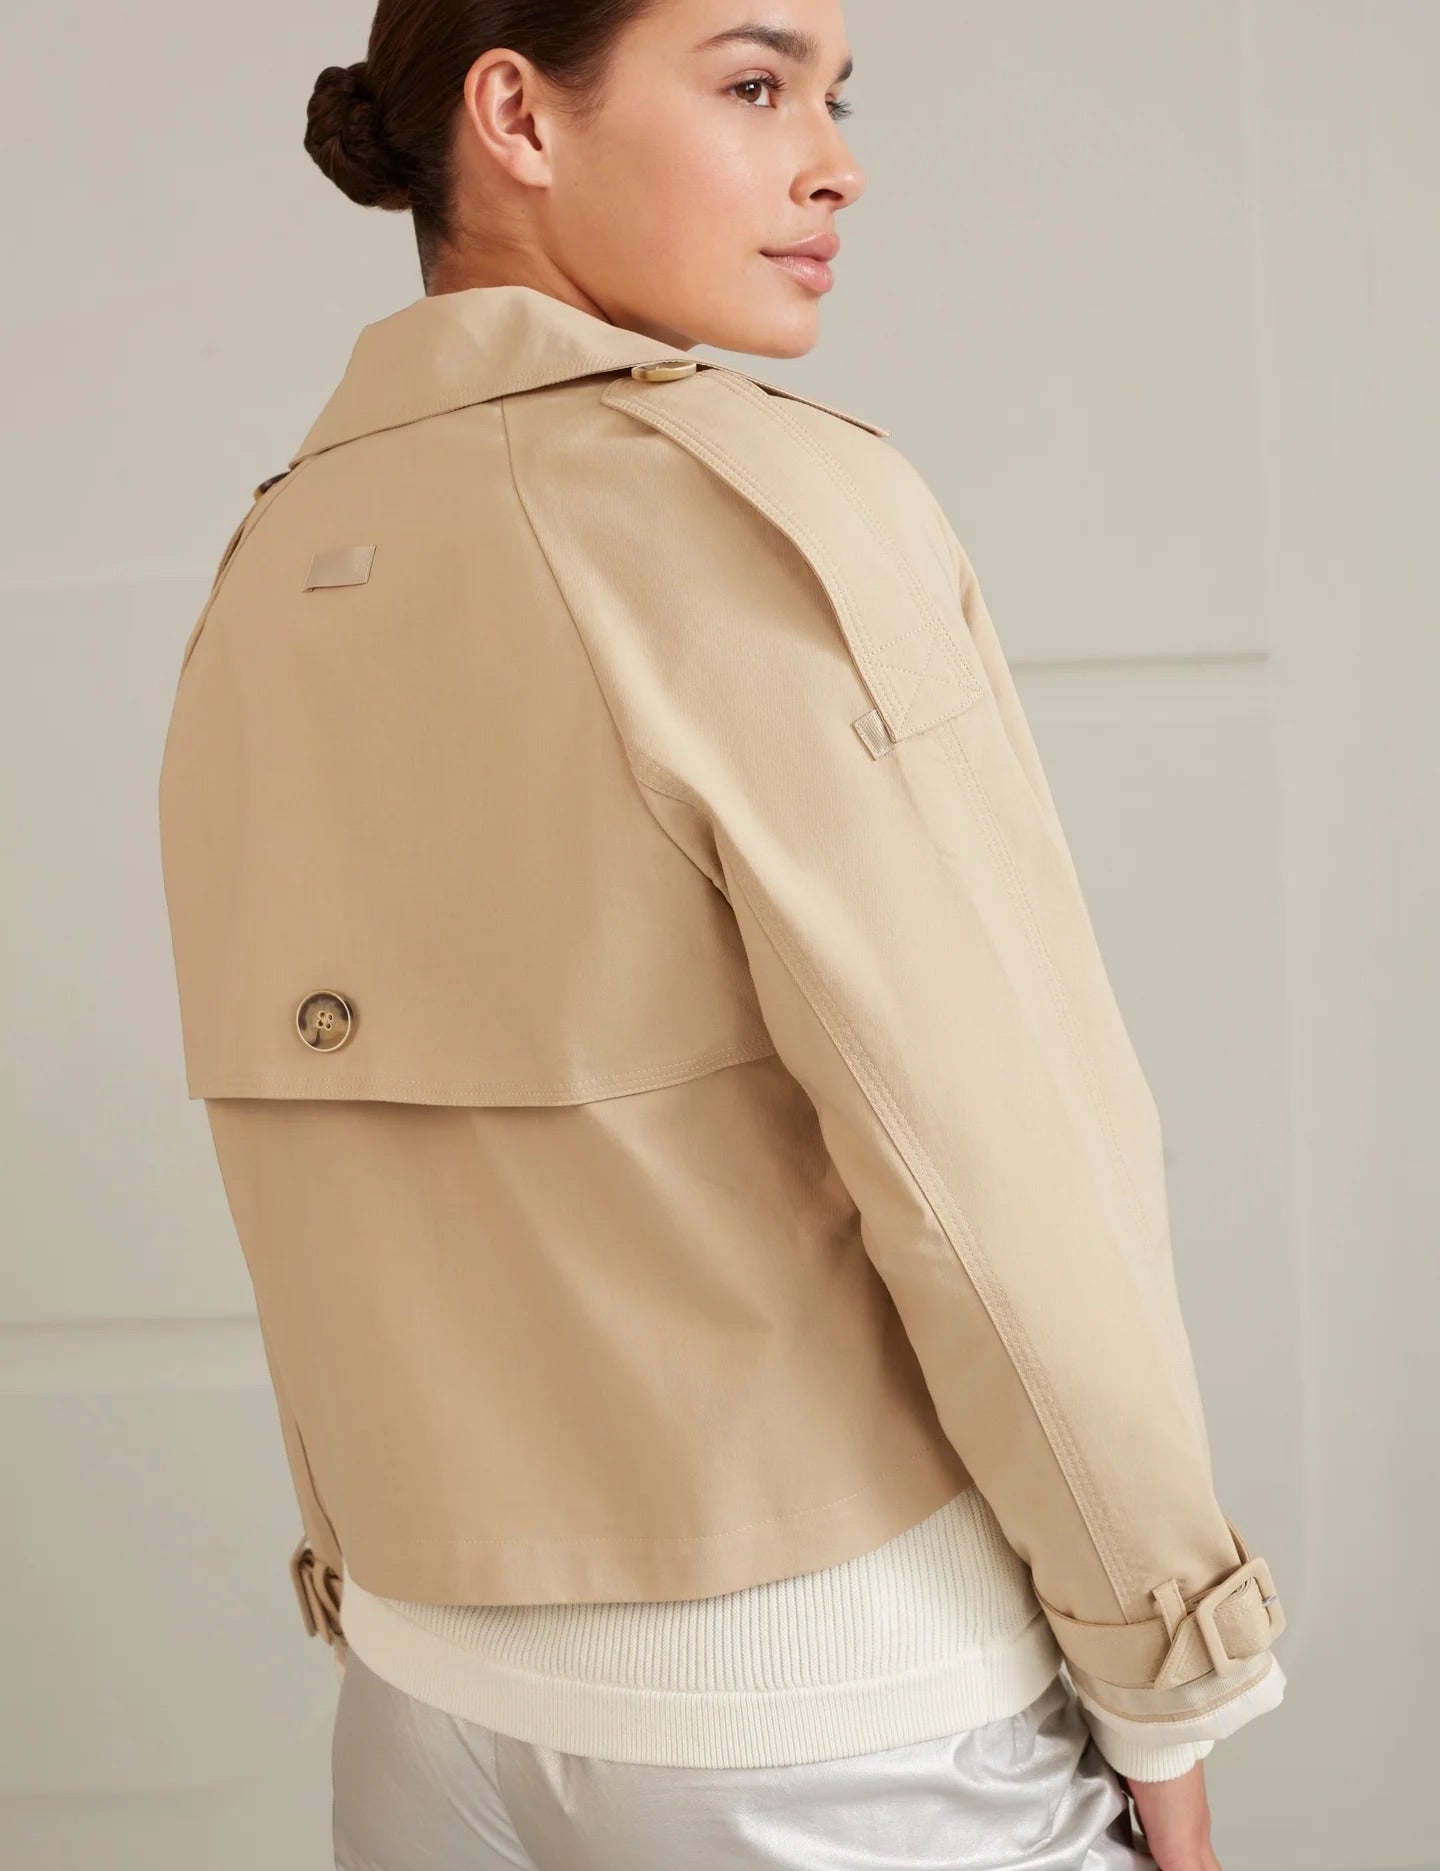 cropped-trench-coat-with-long-sleeves-and-shoulder-details-white-pepper-beige_a214aaaa-7d6b-4810-8161-c10d9307ac14_2880x_jpg.jpg